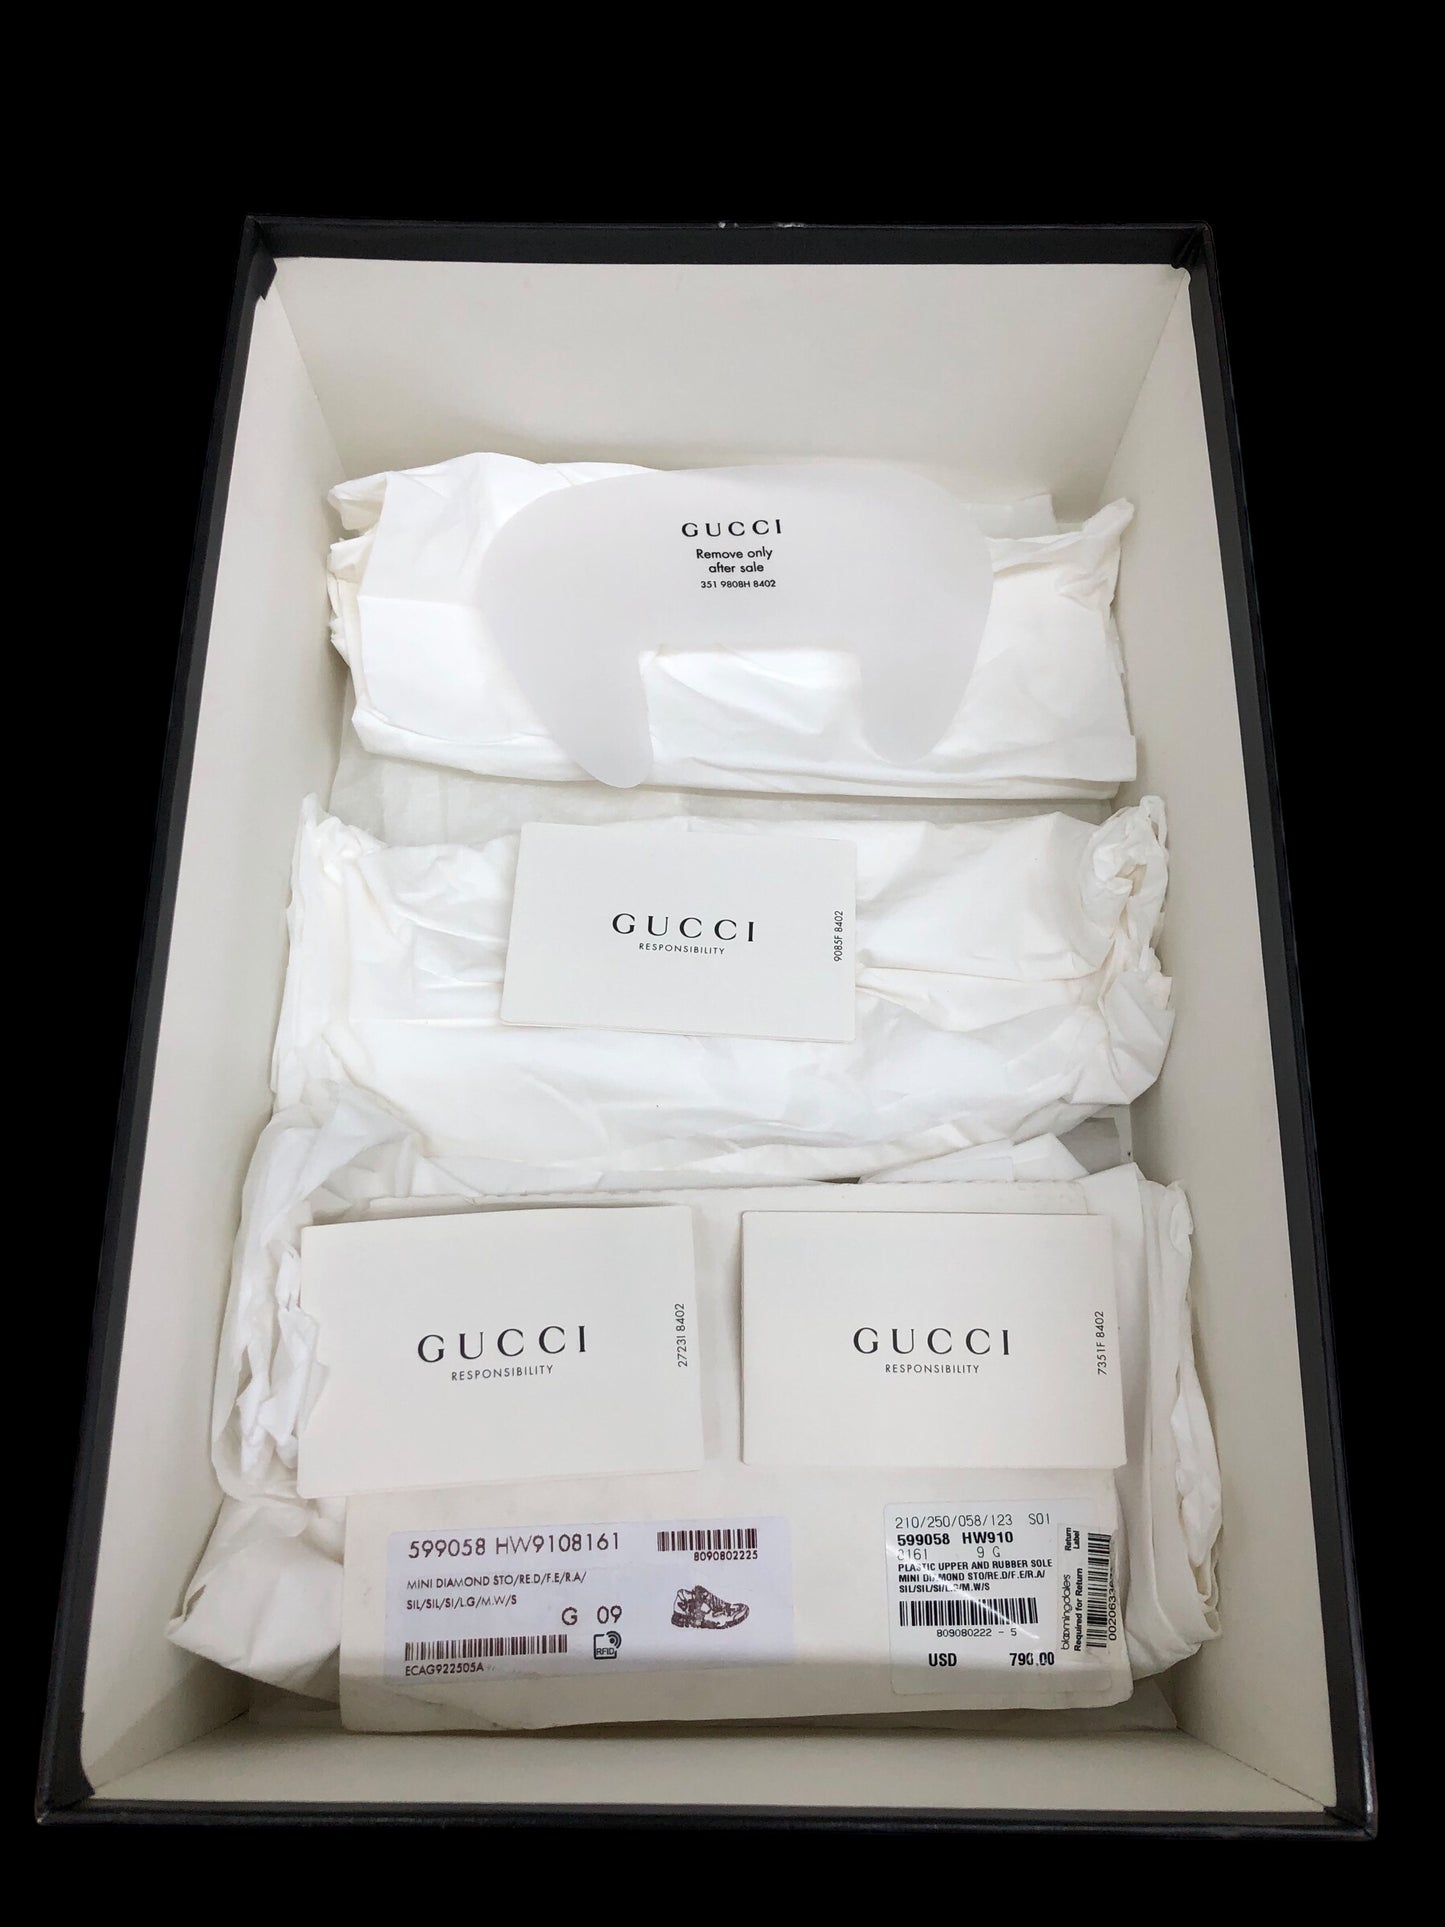 Gucci Ultrapace "Silver" 599058 HW910 8161 US Size 9